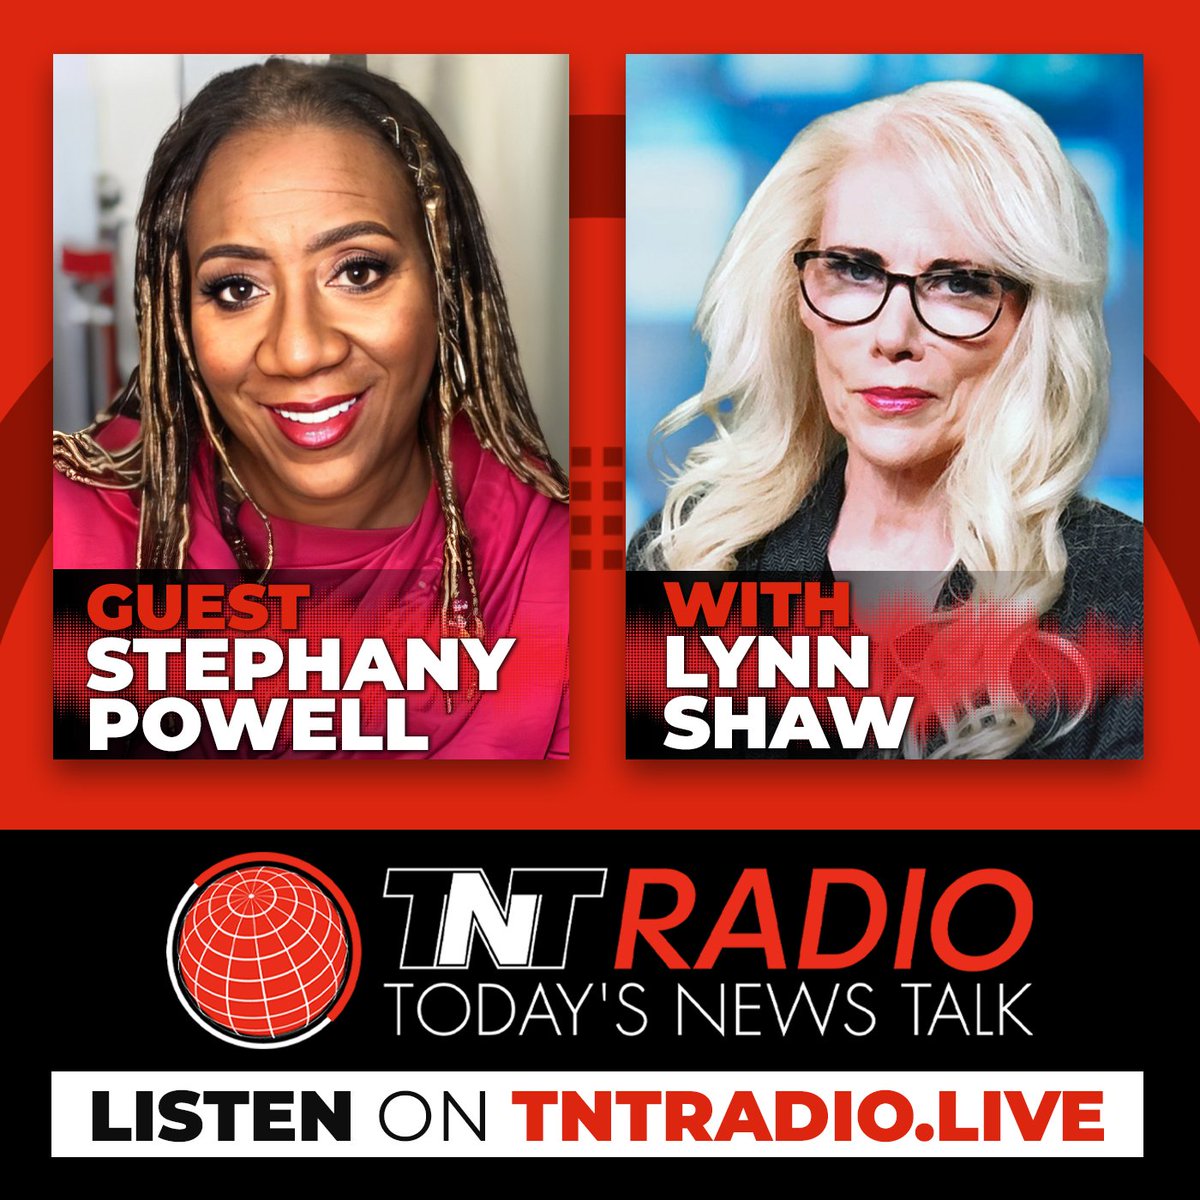 Dr Stephany Powell discusses the unjust treatment of Black women & girls who are victimized in the sex trade on Lynn’s Warriors with Lynn Shaw on TNT Radio.
#listenlive tntradio.live @stephany_dr 
2PM (NEW YORK) 7PM (LONDON) 5AM (BRISBANE)
#tntradiolive #lynnswarriors